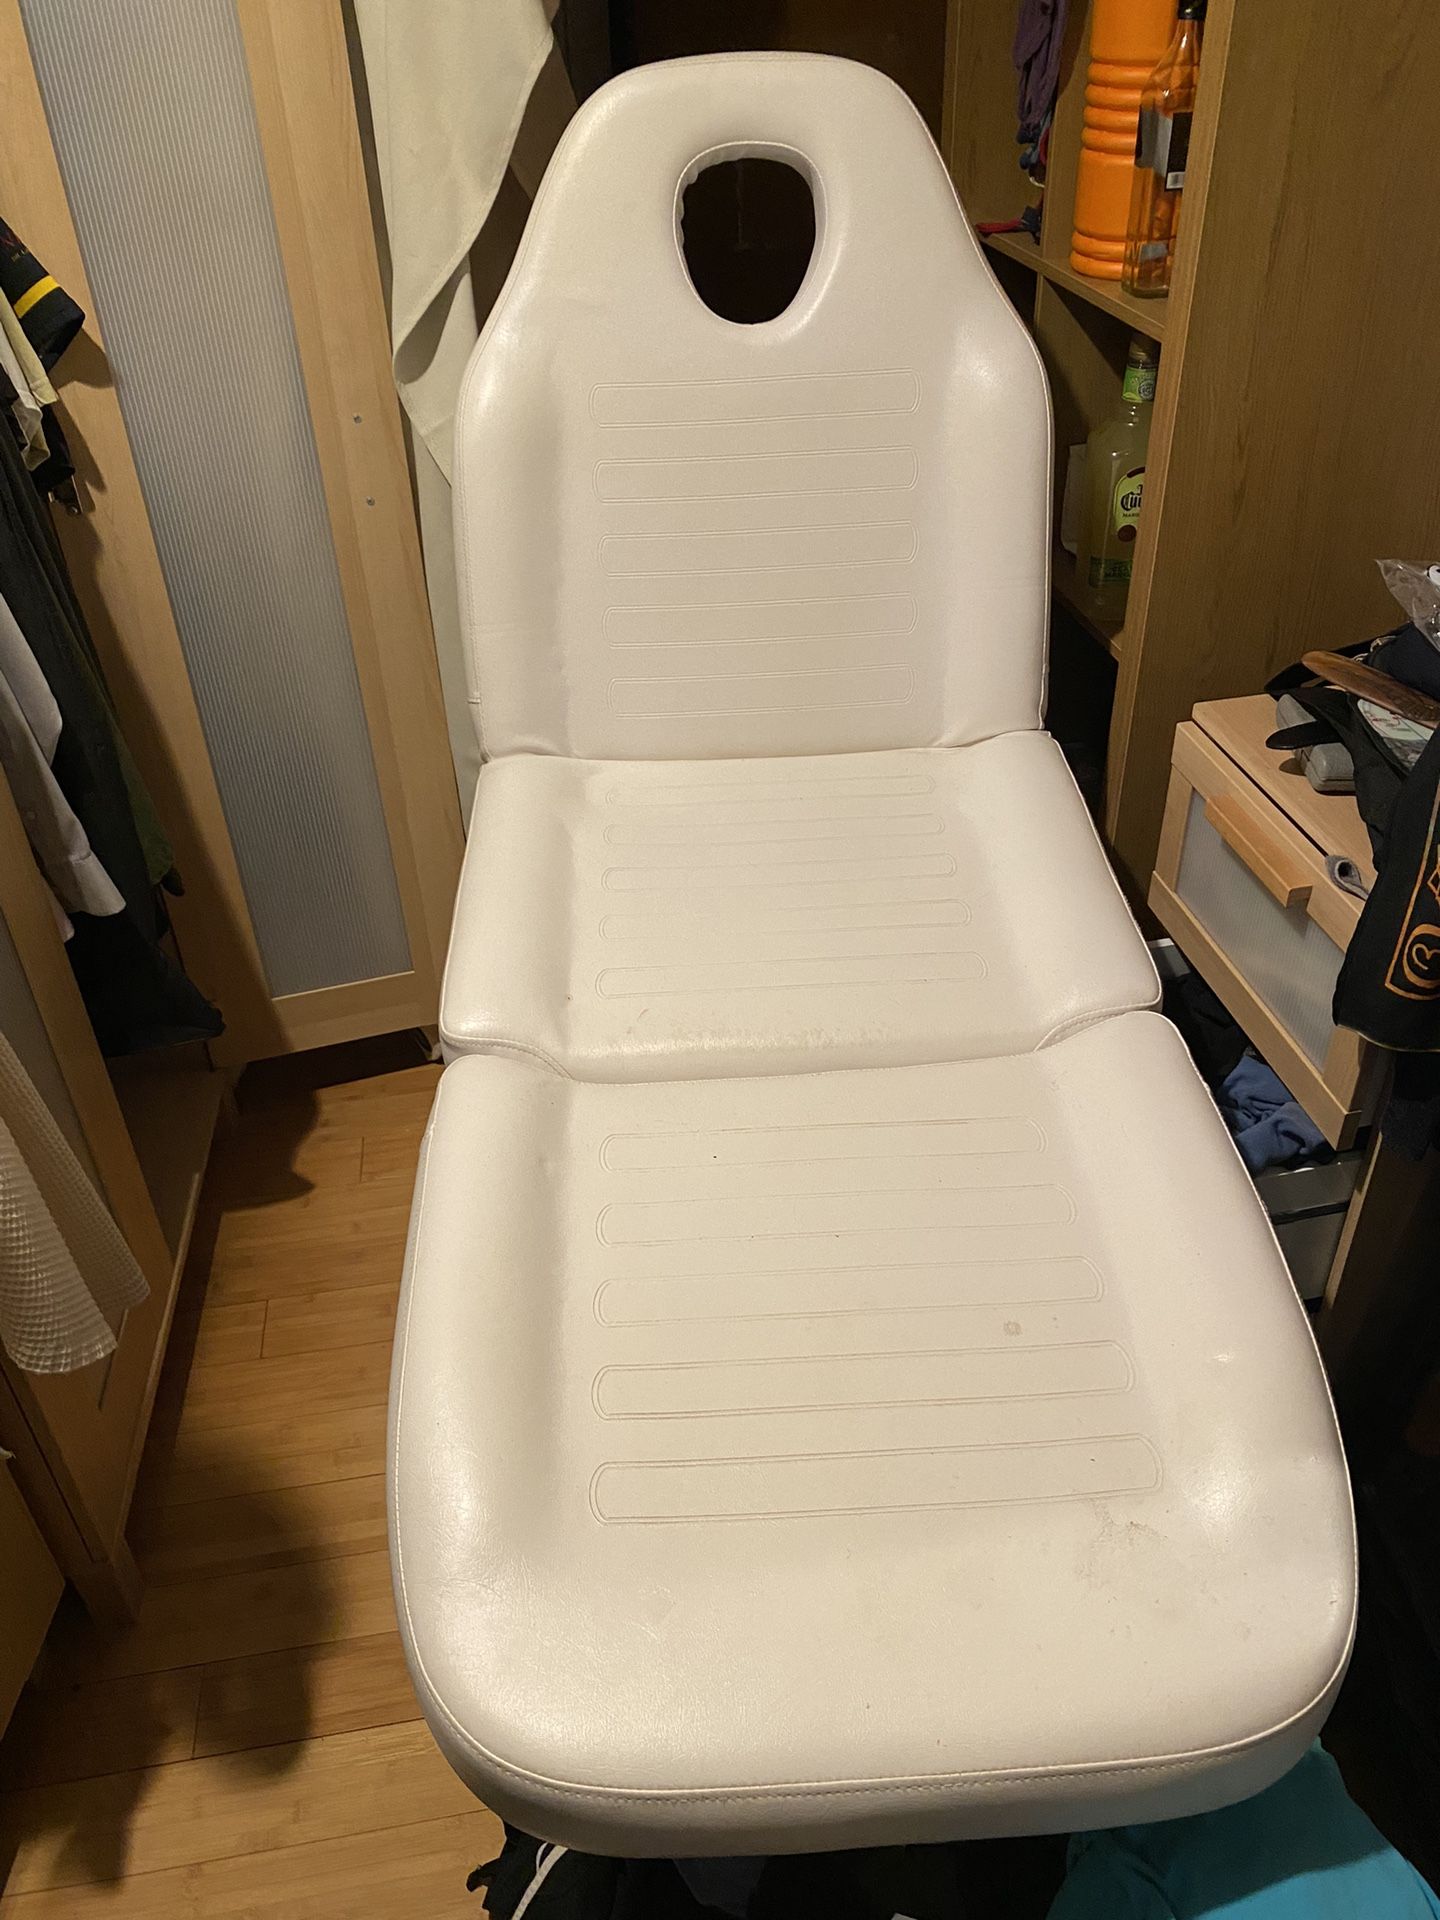 Pending Pickup Today Free Massage chair 